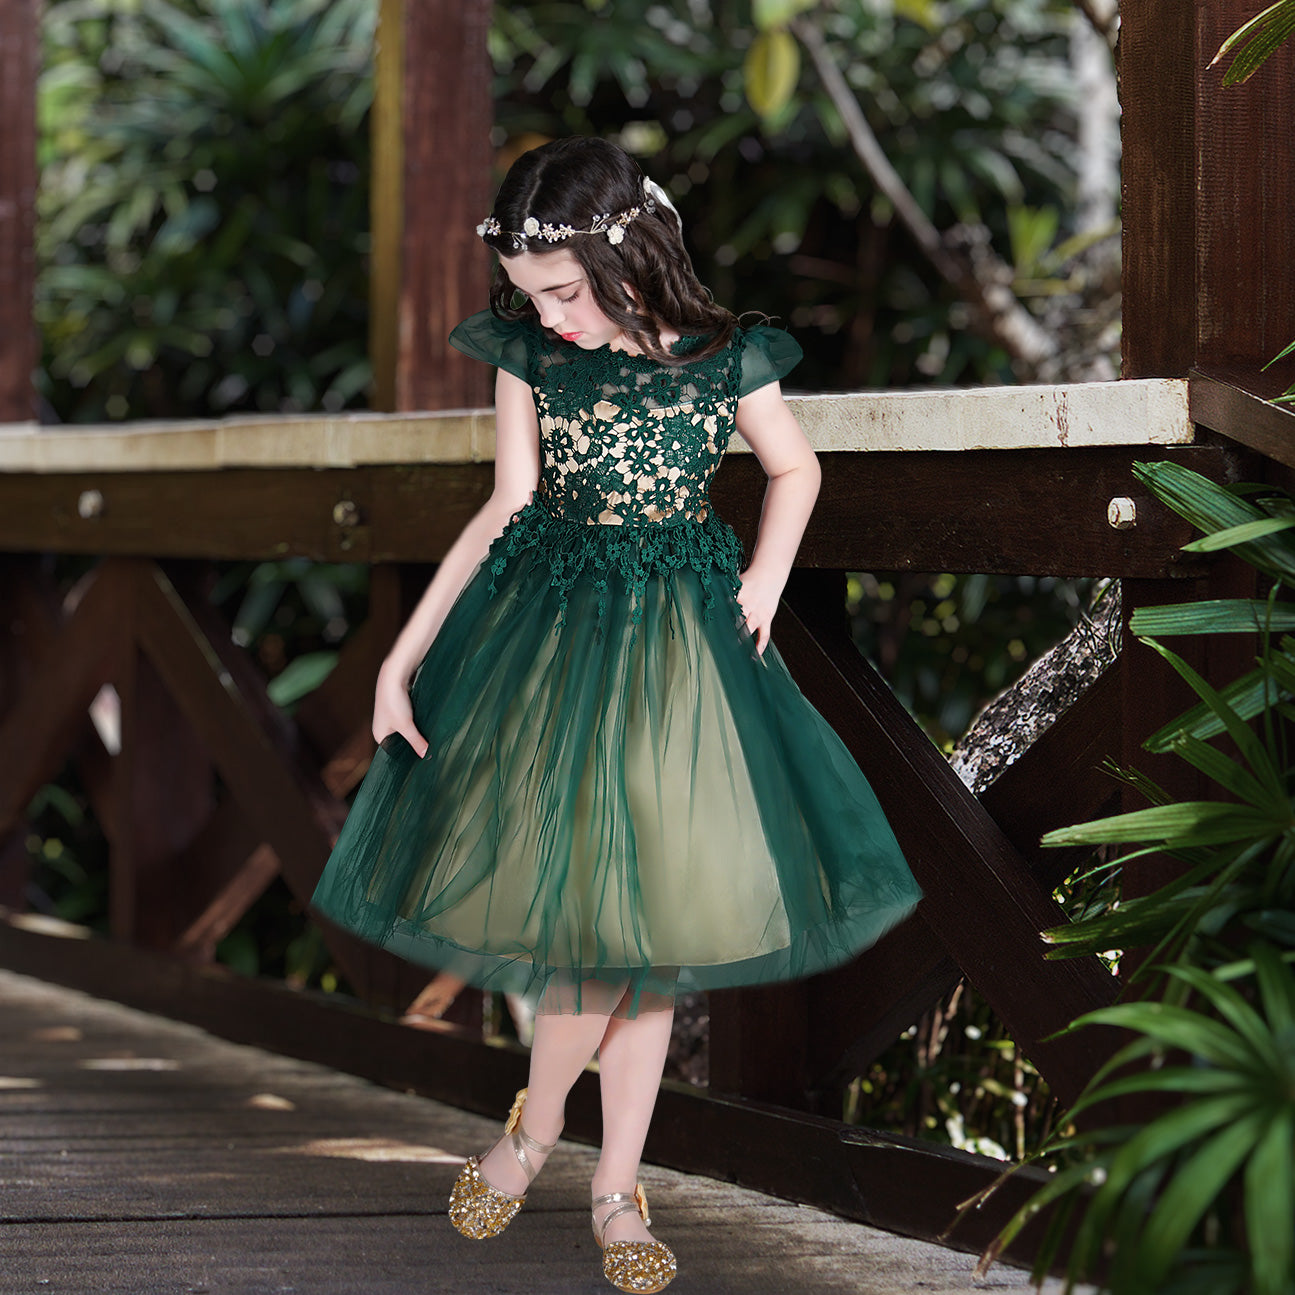 Green Toddler Dress, High-Quality Styles